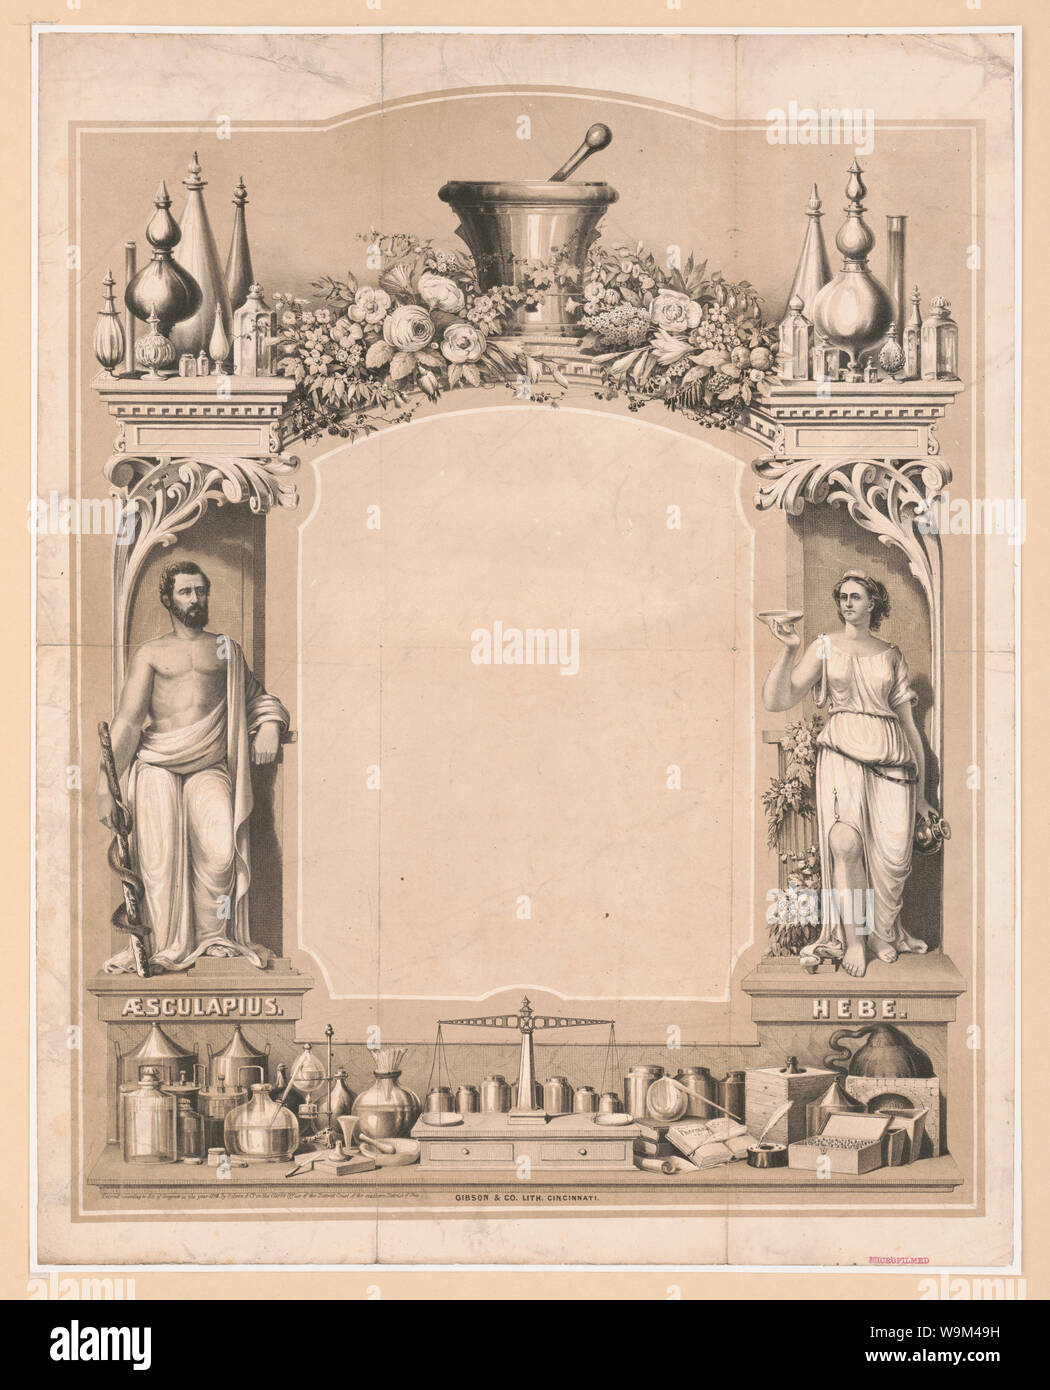 Apothecary card Abstract: Print shows a blank apothecary card with Aesculapius on the left and Hebe on the right flanking a large blank space, at top center is a mortar and pestle surrounded by flower blossoms, with various types of containers at the upper corners; at the bottom center is a balance with various chemical instruments to the right and left. Stock Photo